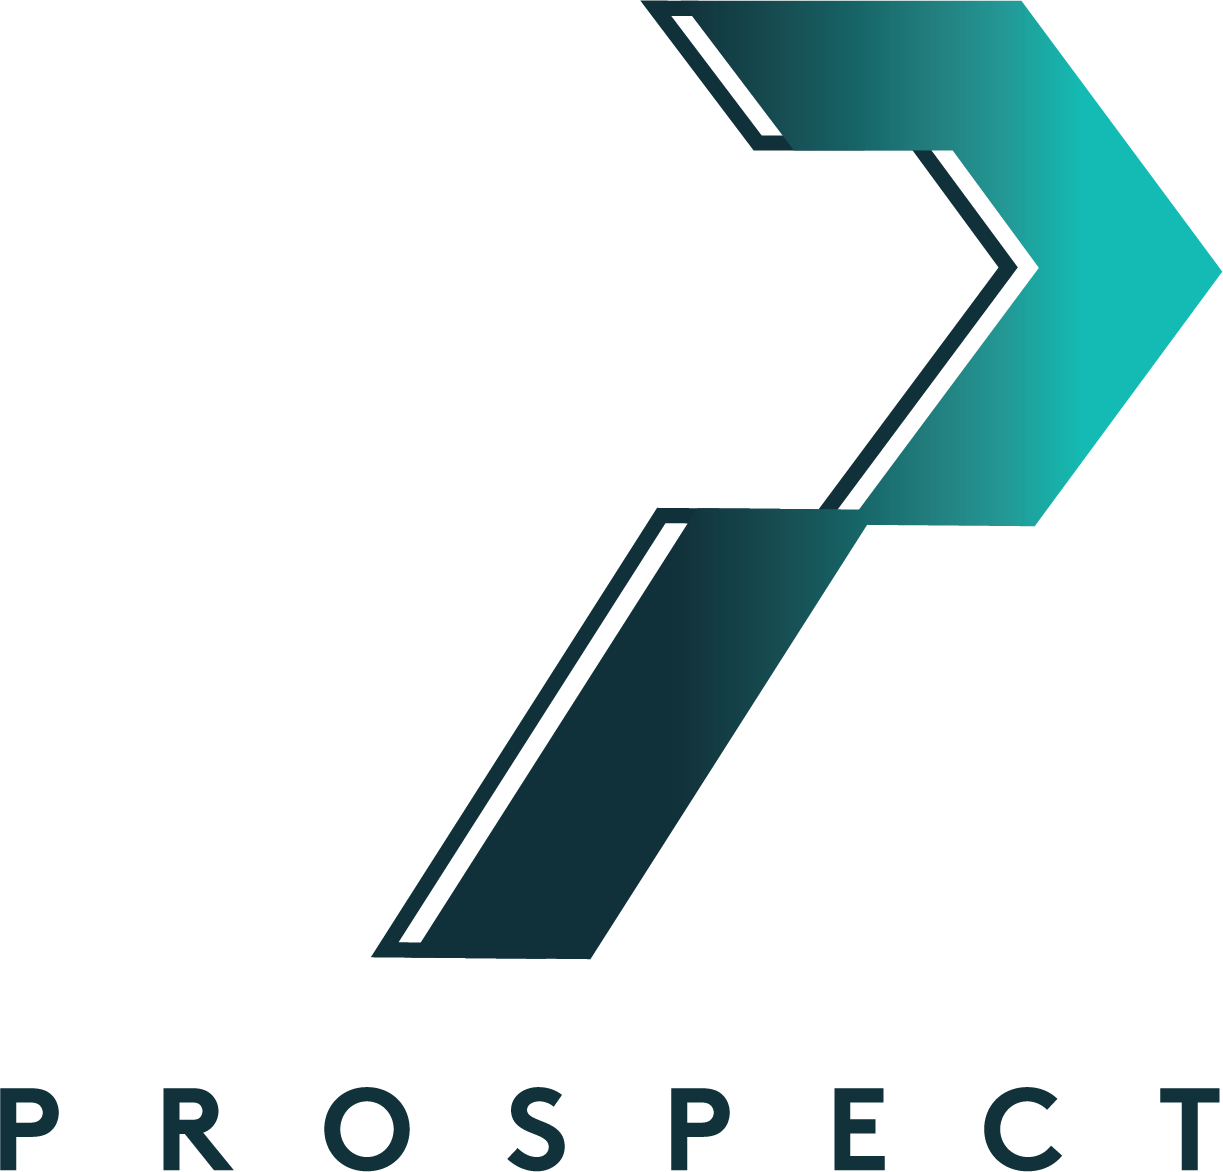 Prospect Insurance Brokers, an innovative insurance and reinsurance broker creating tailor-made solutions for the UK, US and International markets and specialising in binding authority and reinsurance business placed into Lloyd’s of London and London company markets.